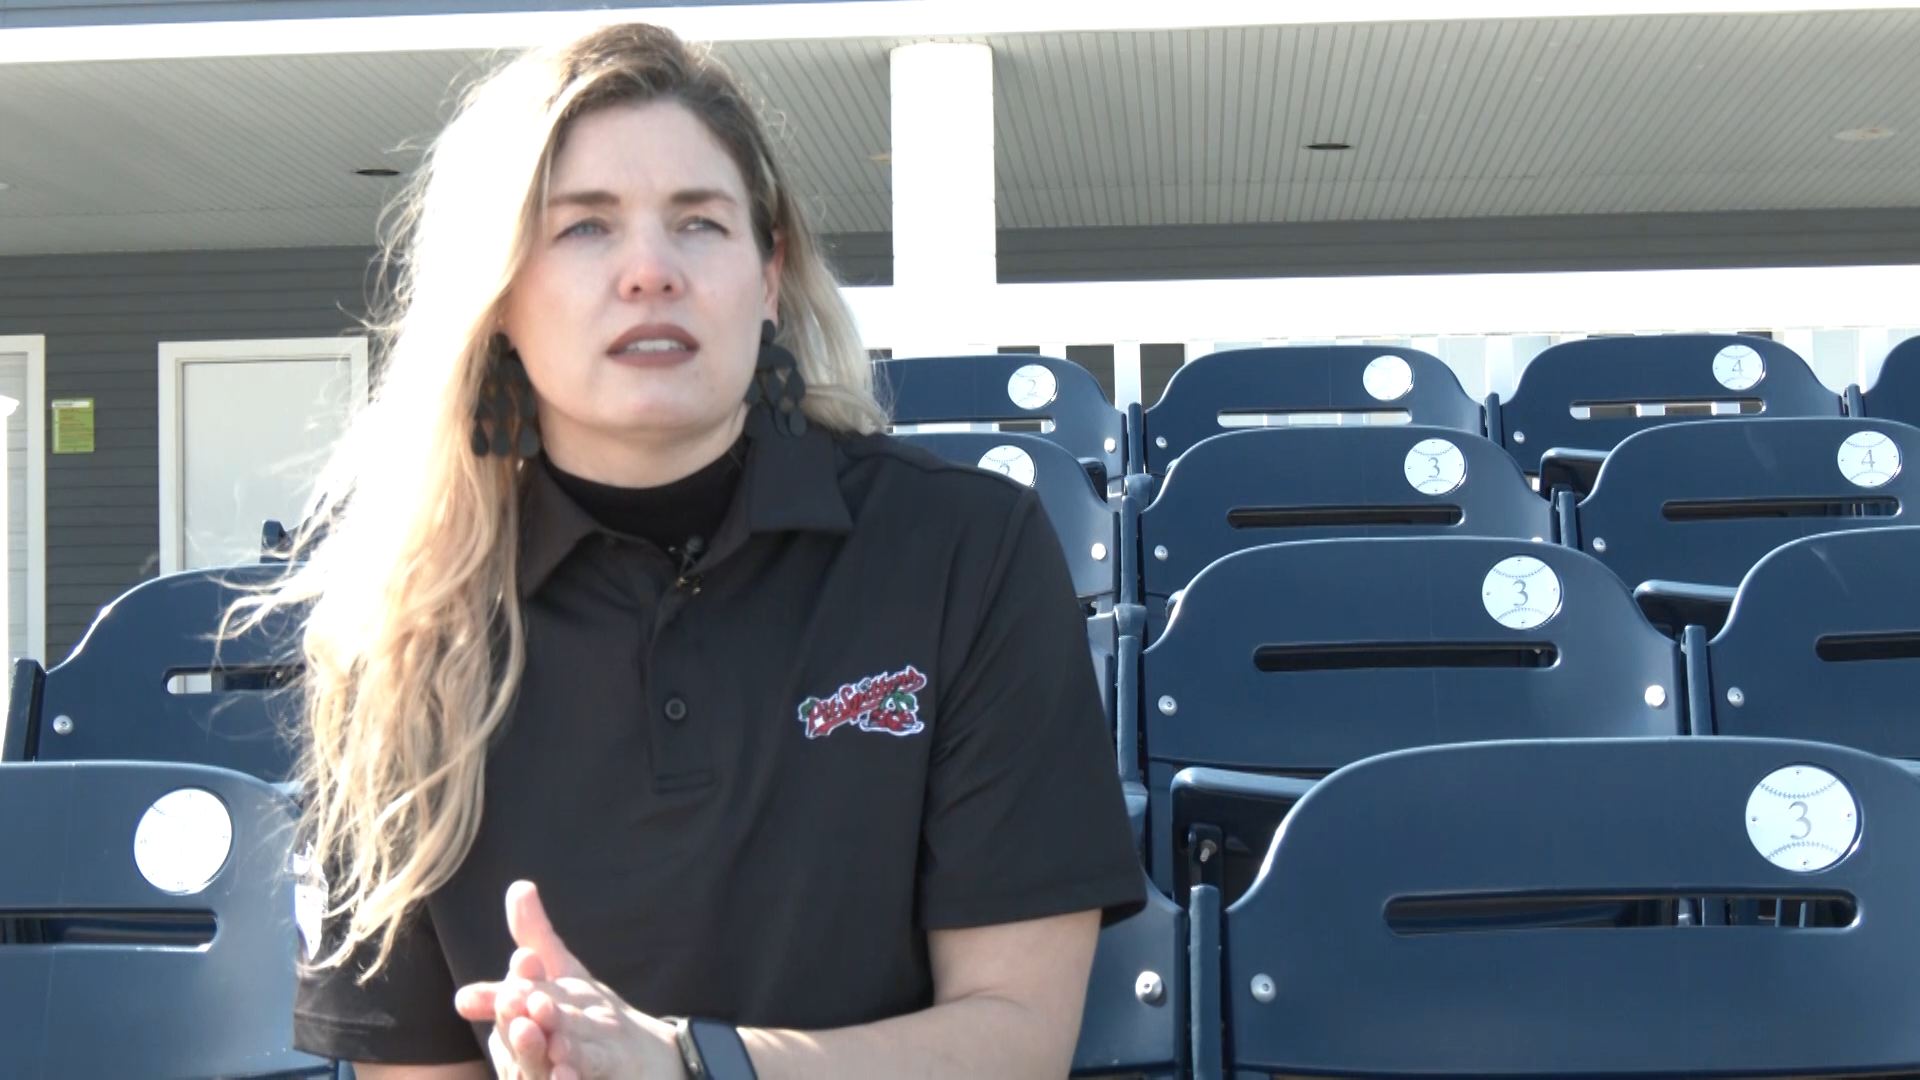 Traverse City Pit Spitters General Manager Jacqueline Holm was named the 2023 Northwoods League Executive of the Year on Wednesday.